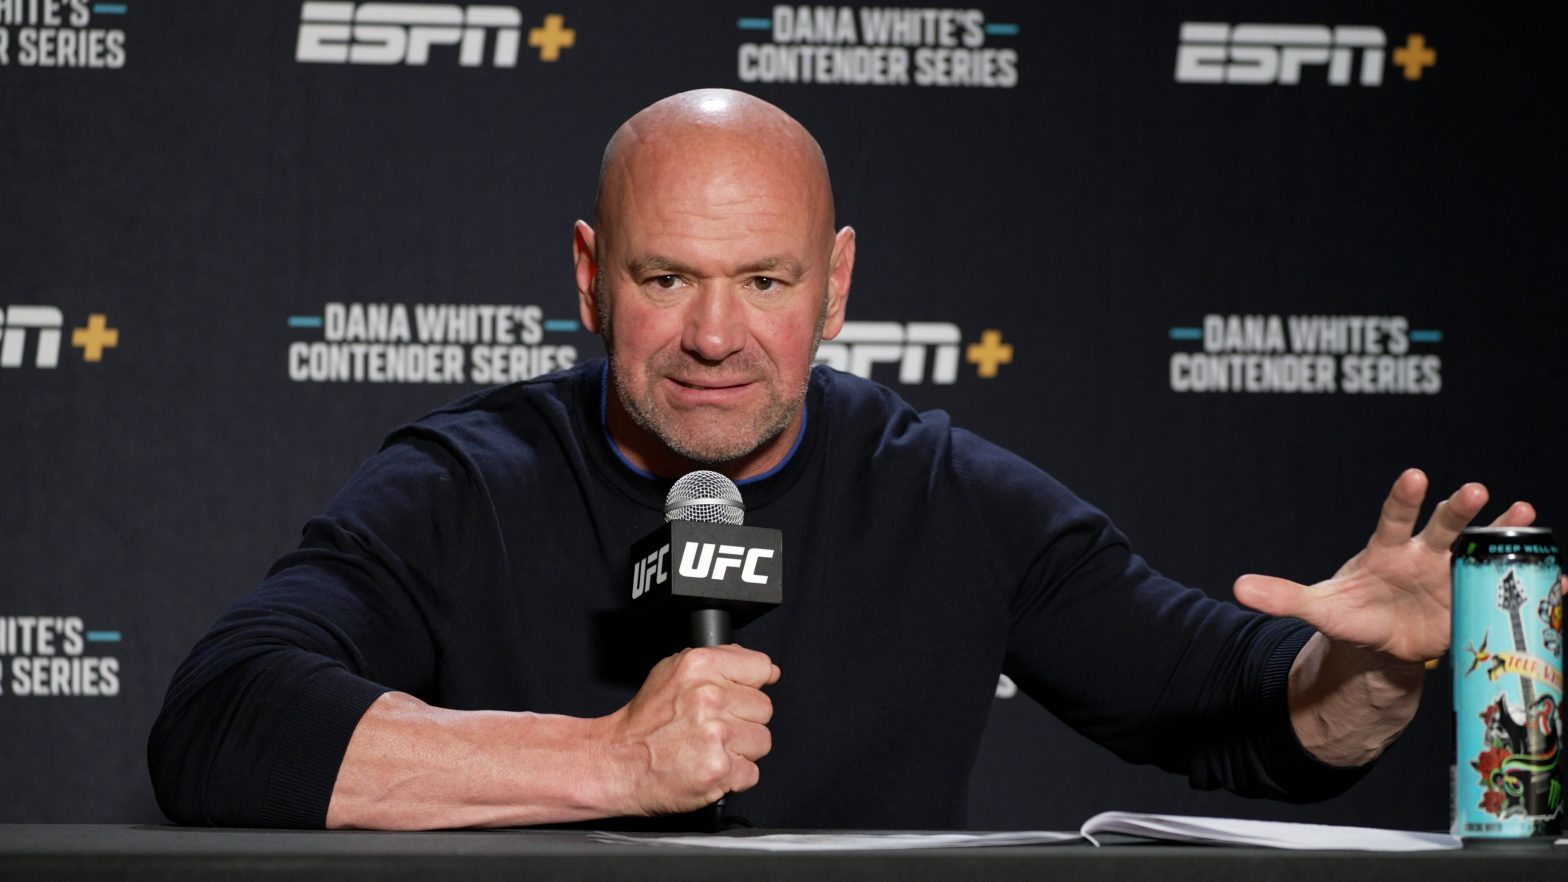 Dana White: UFC 300 doesn’t have its main event yet, and ‘who knows who’ it will be